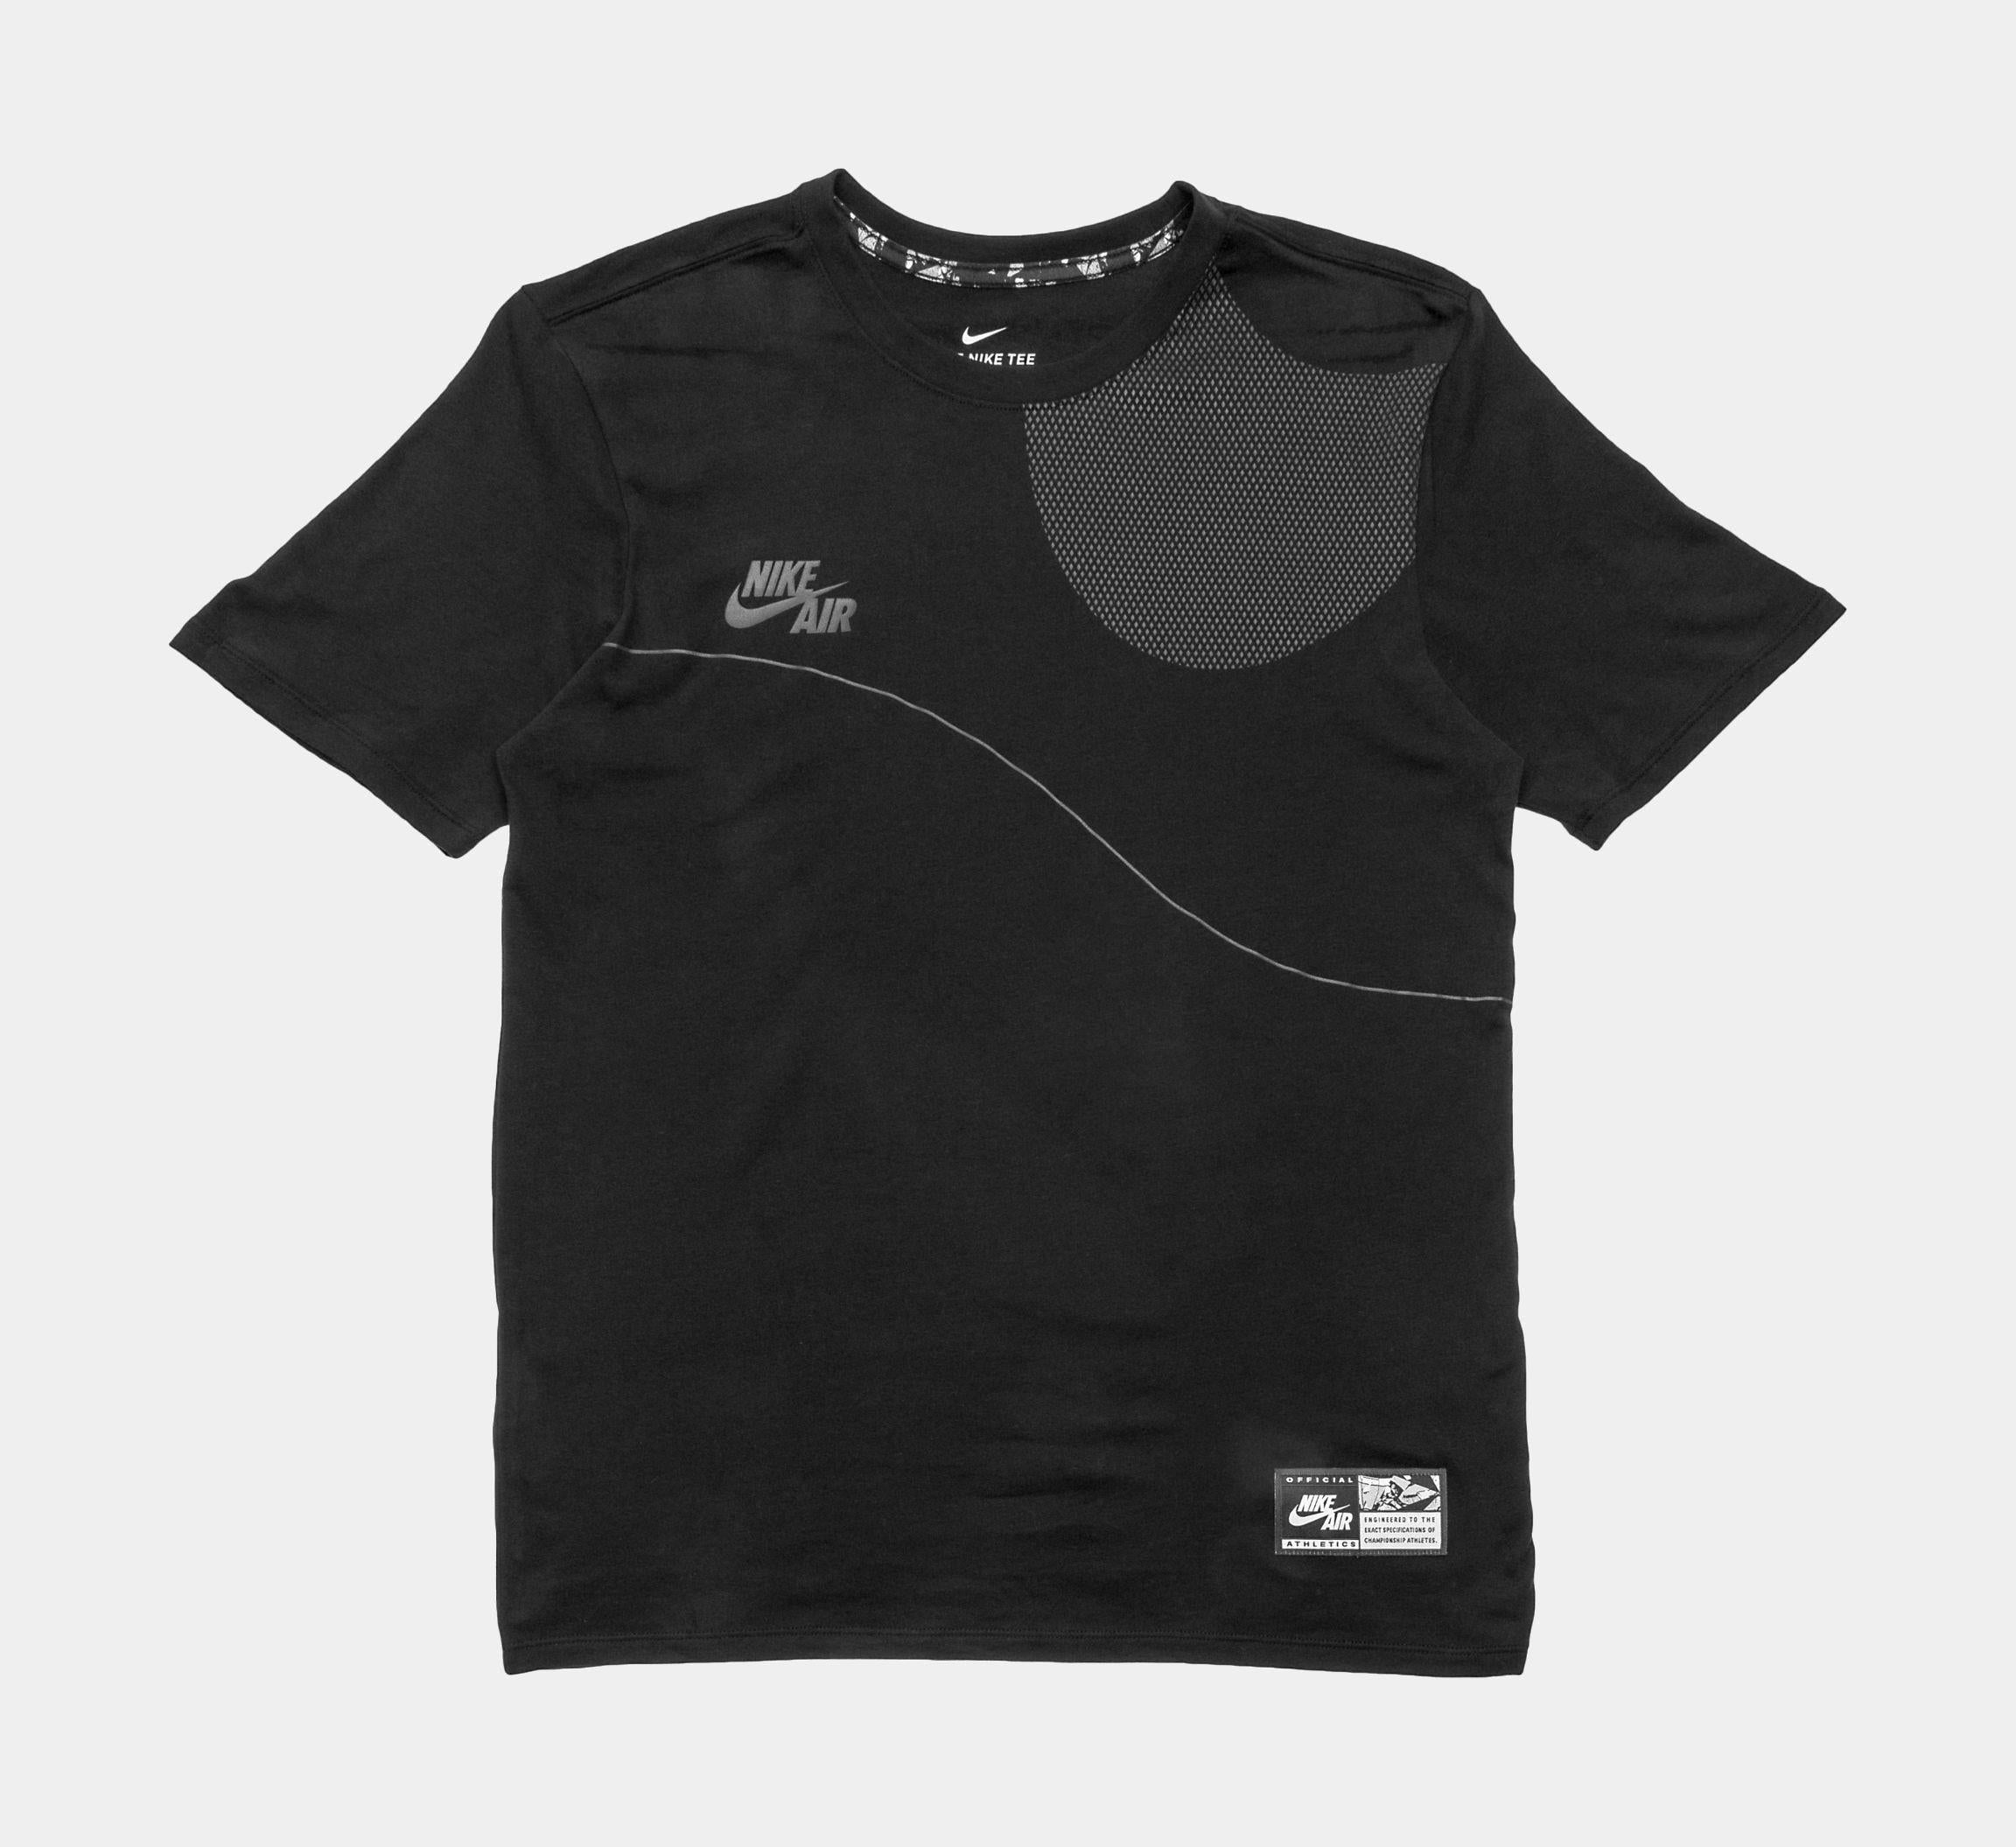 The Most Recent Collection of Air 3 Mens T-Shirt (Black) Nike